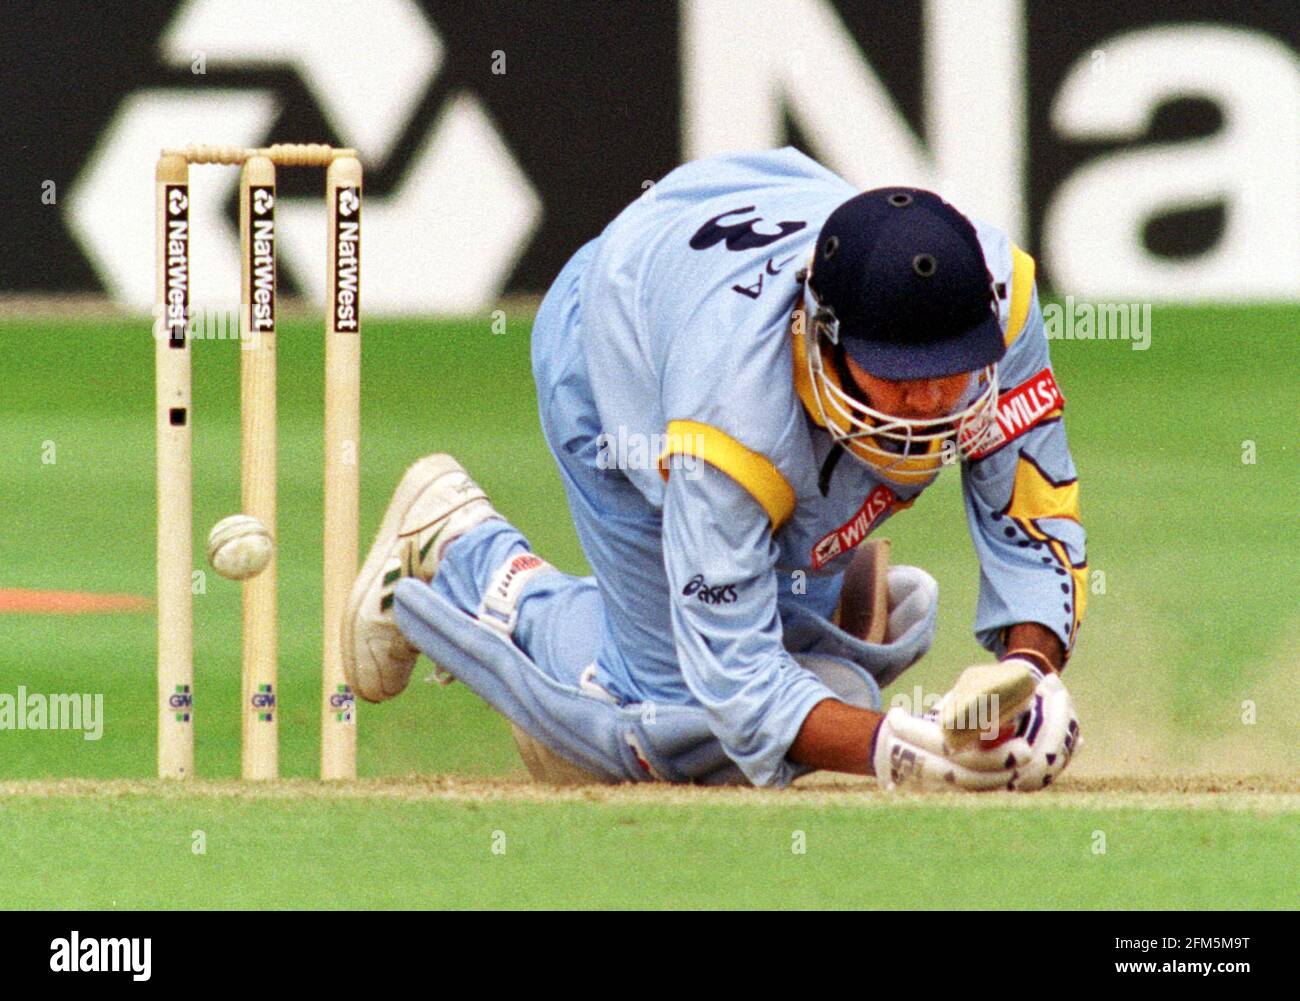 Cricket World Cup 1999 India v New Zealand Super Six Group   Ajay Jadeja falls over trying to play a ball bowled from Allot as the Kiwis go on to win and book a place in the World Cup Semi Finals Stock Photo